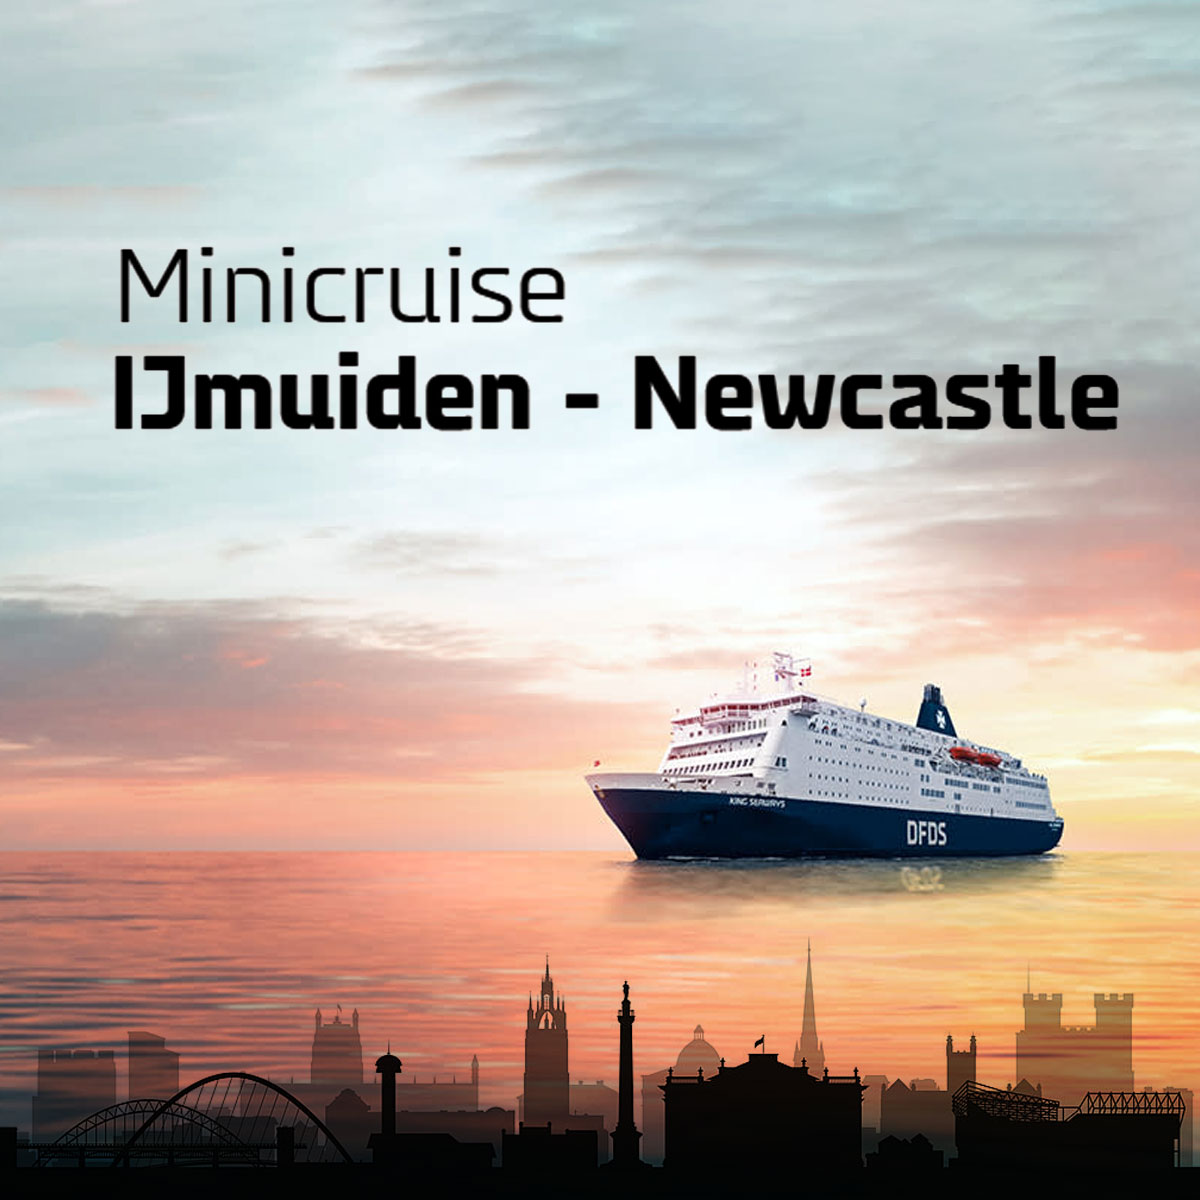 3 x DFDS minicruise New Castle